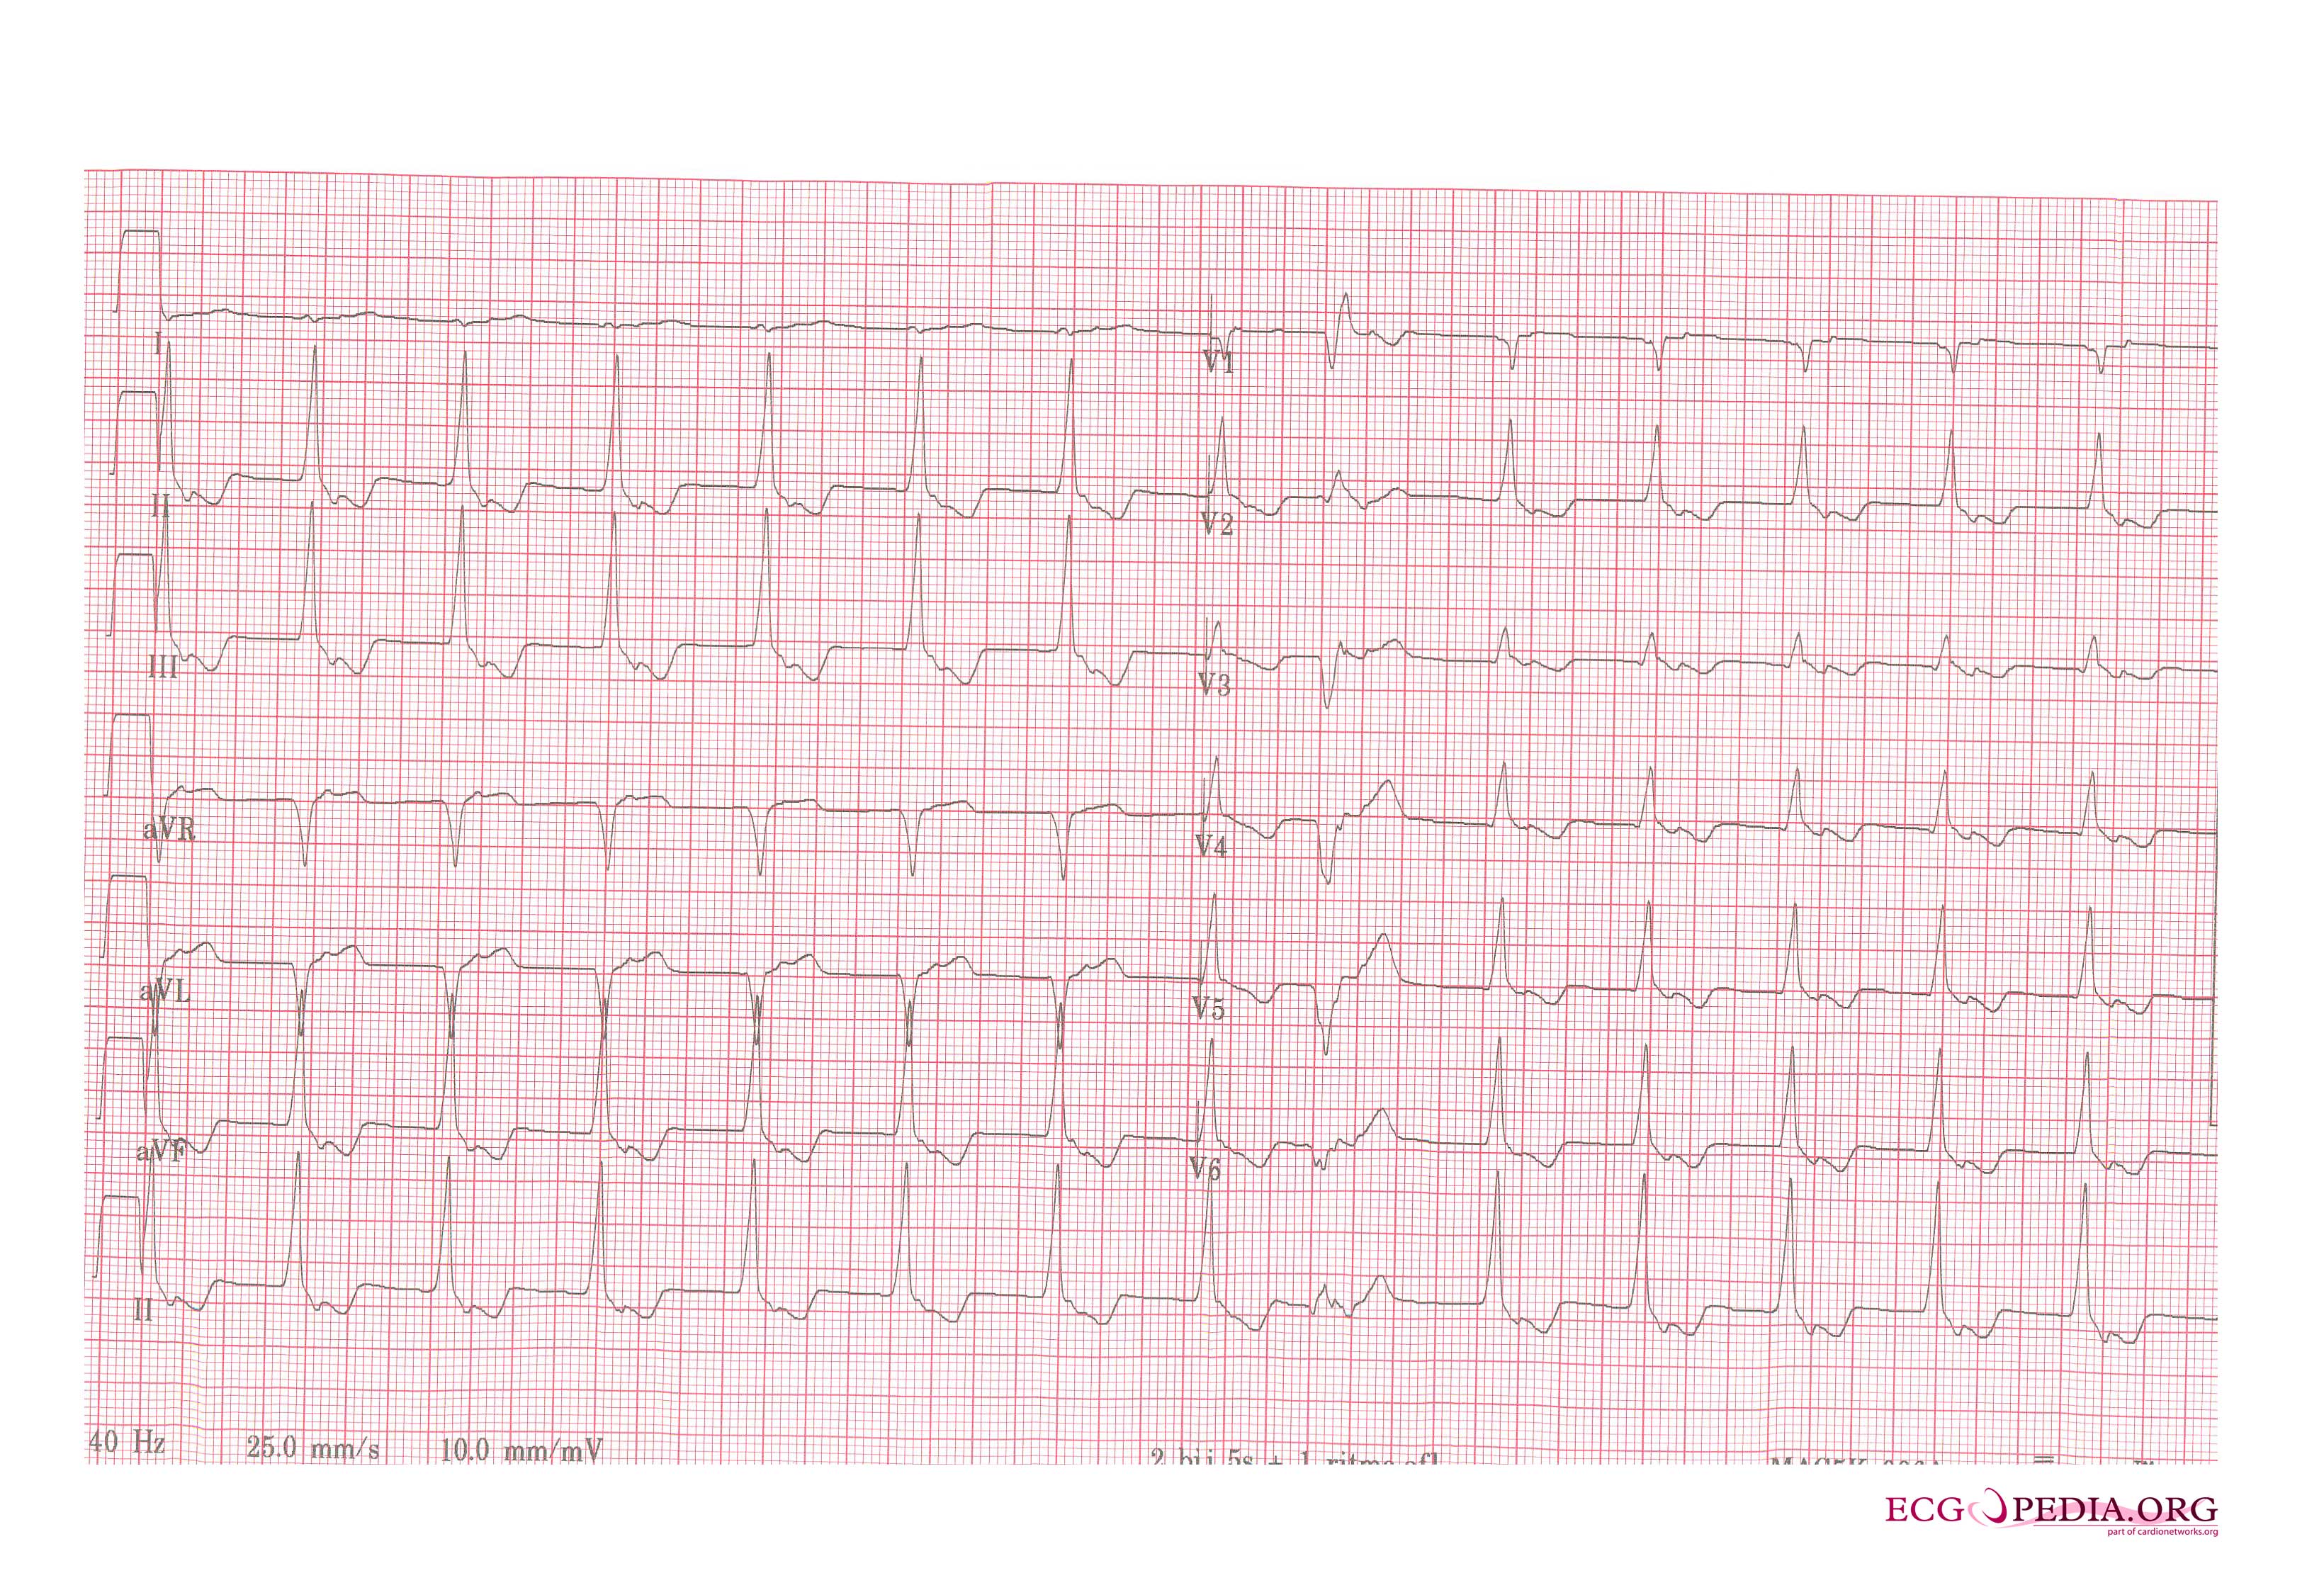 AIVR. Inverted P waves are sign of retrograde atrial activation.